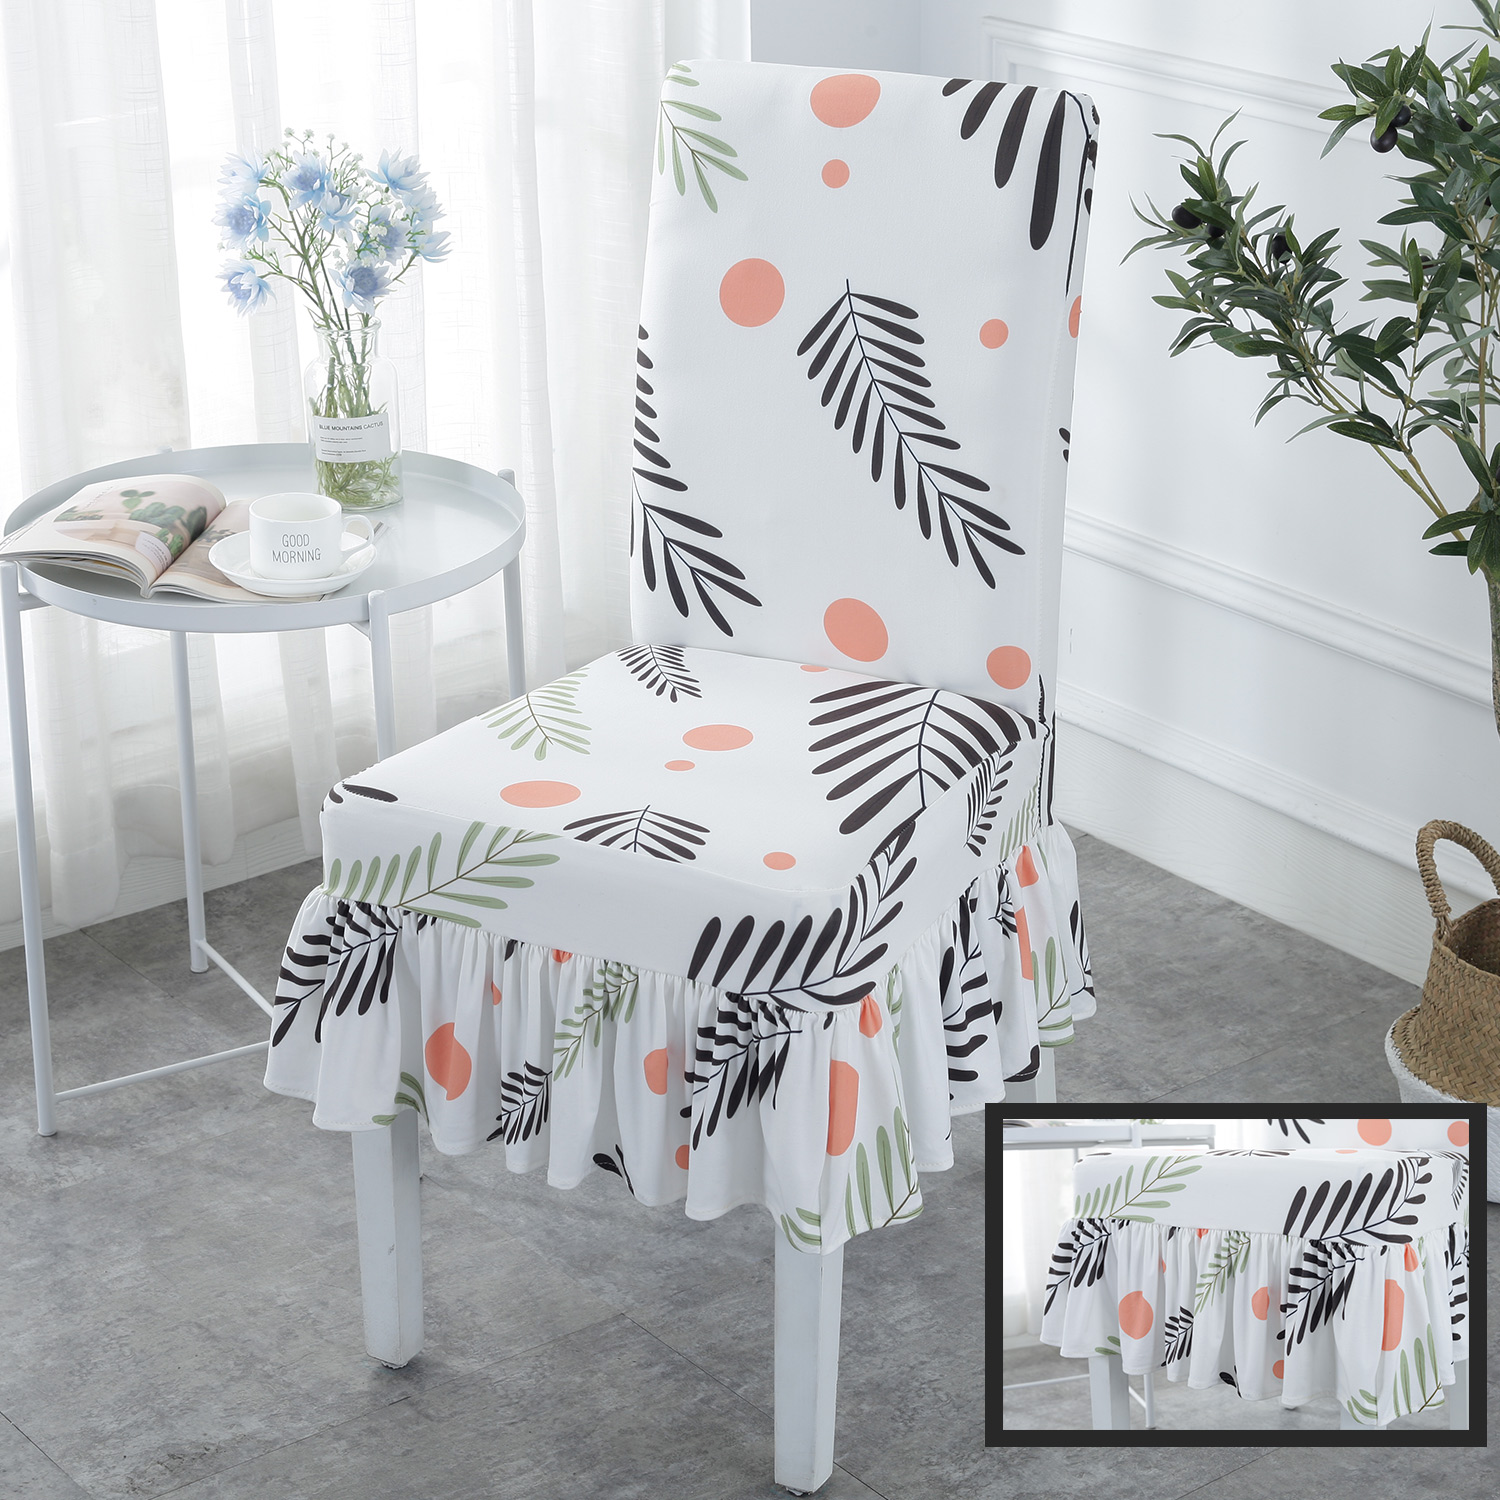 Apartment Home Usage Fancy Patterned Dining Chair Covers Spandex To Protect Chairs From Spills Stains Dirt Grime Wear Shabby